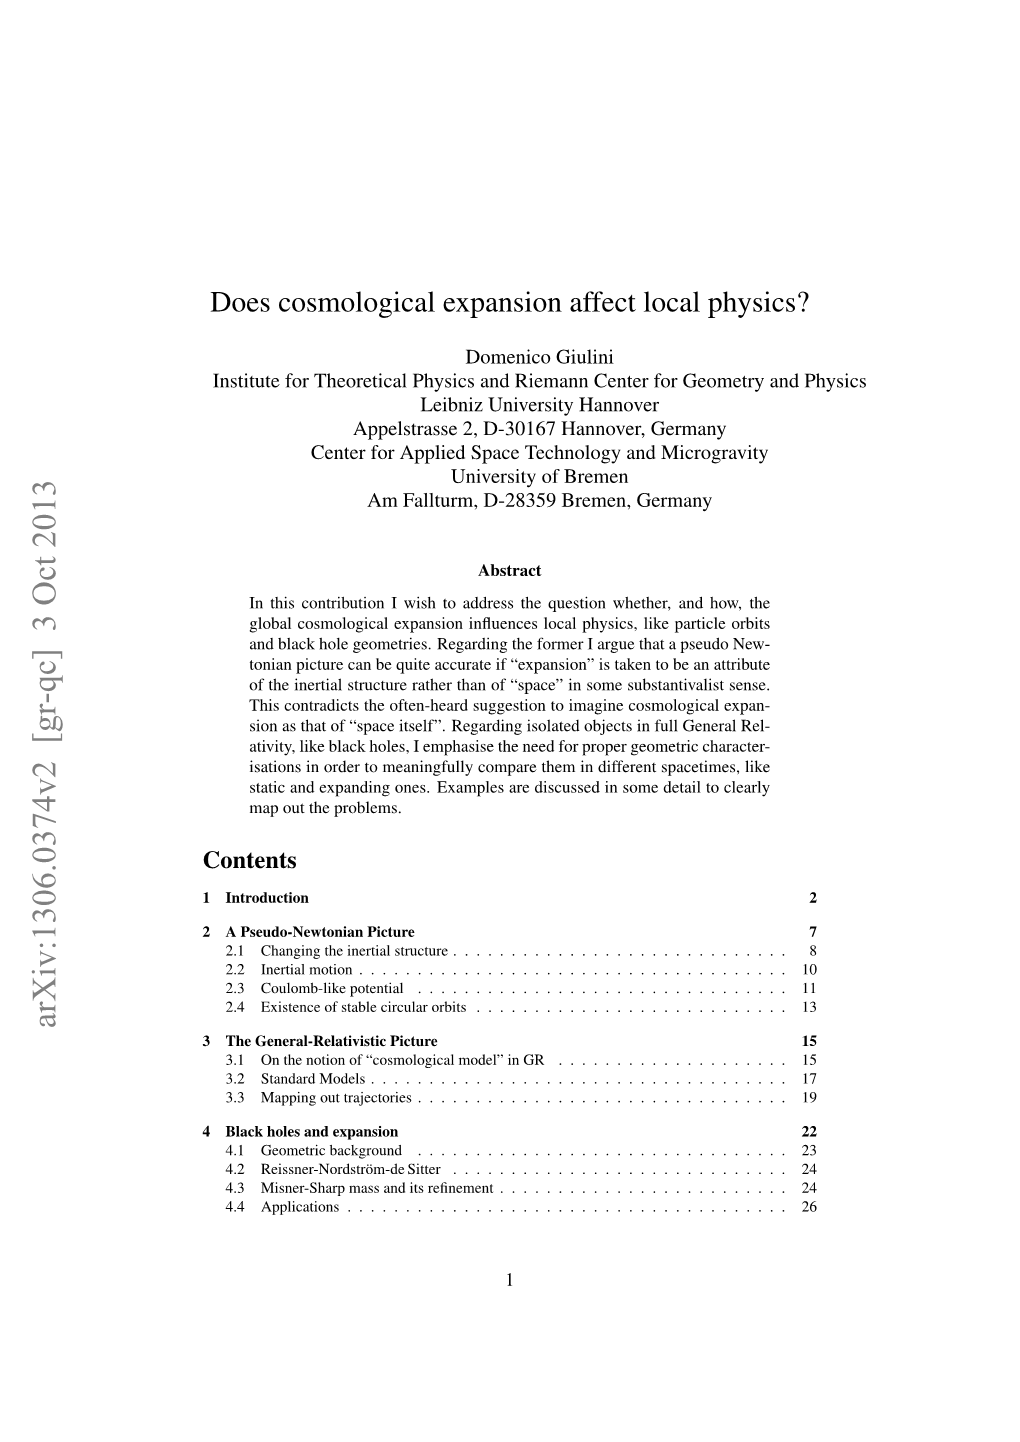 Does Cosmological Expansion Affect Local Physics?